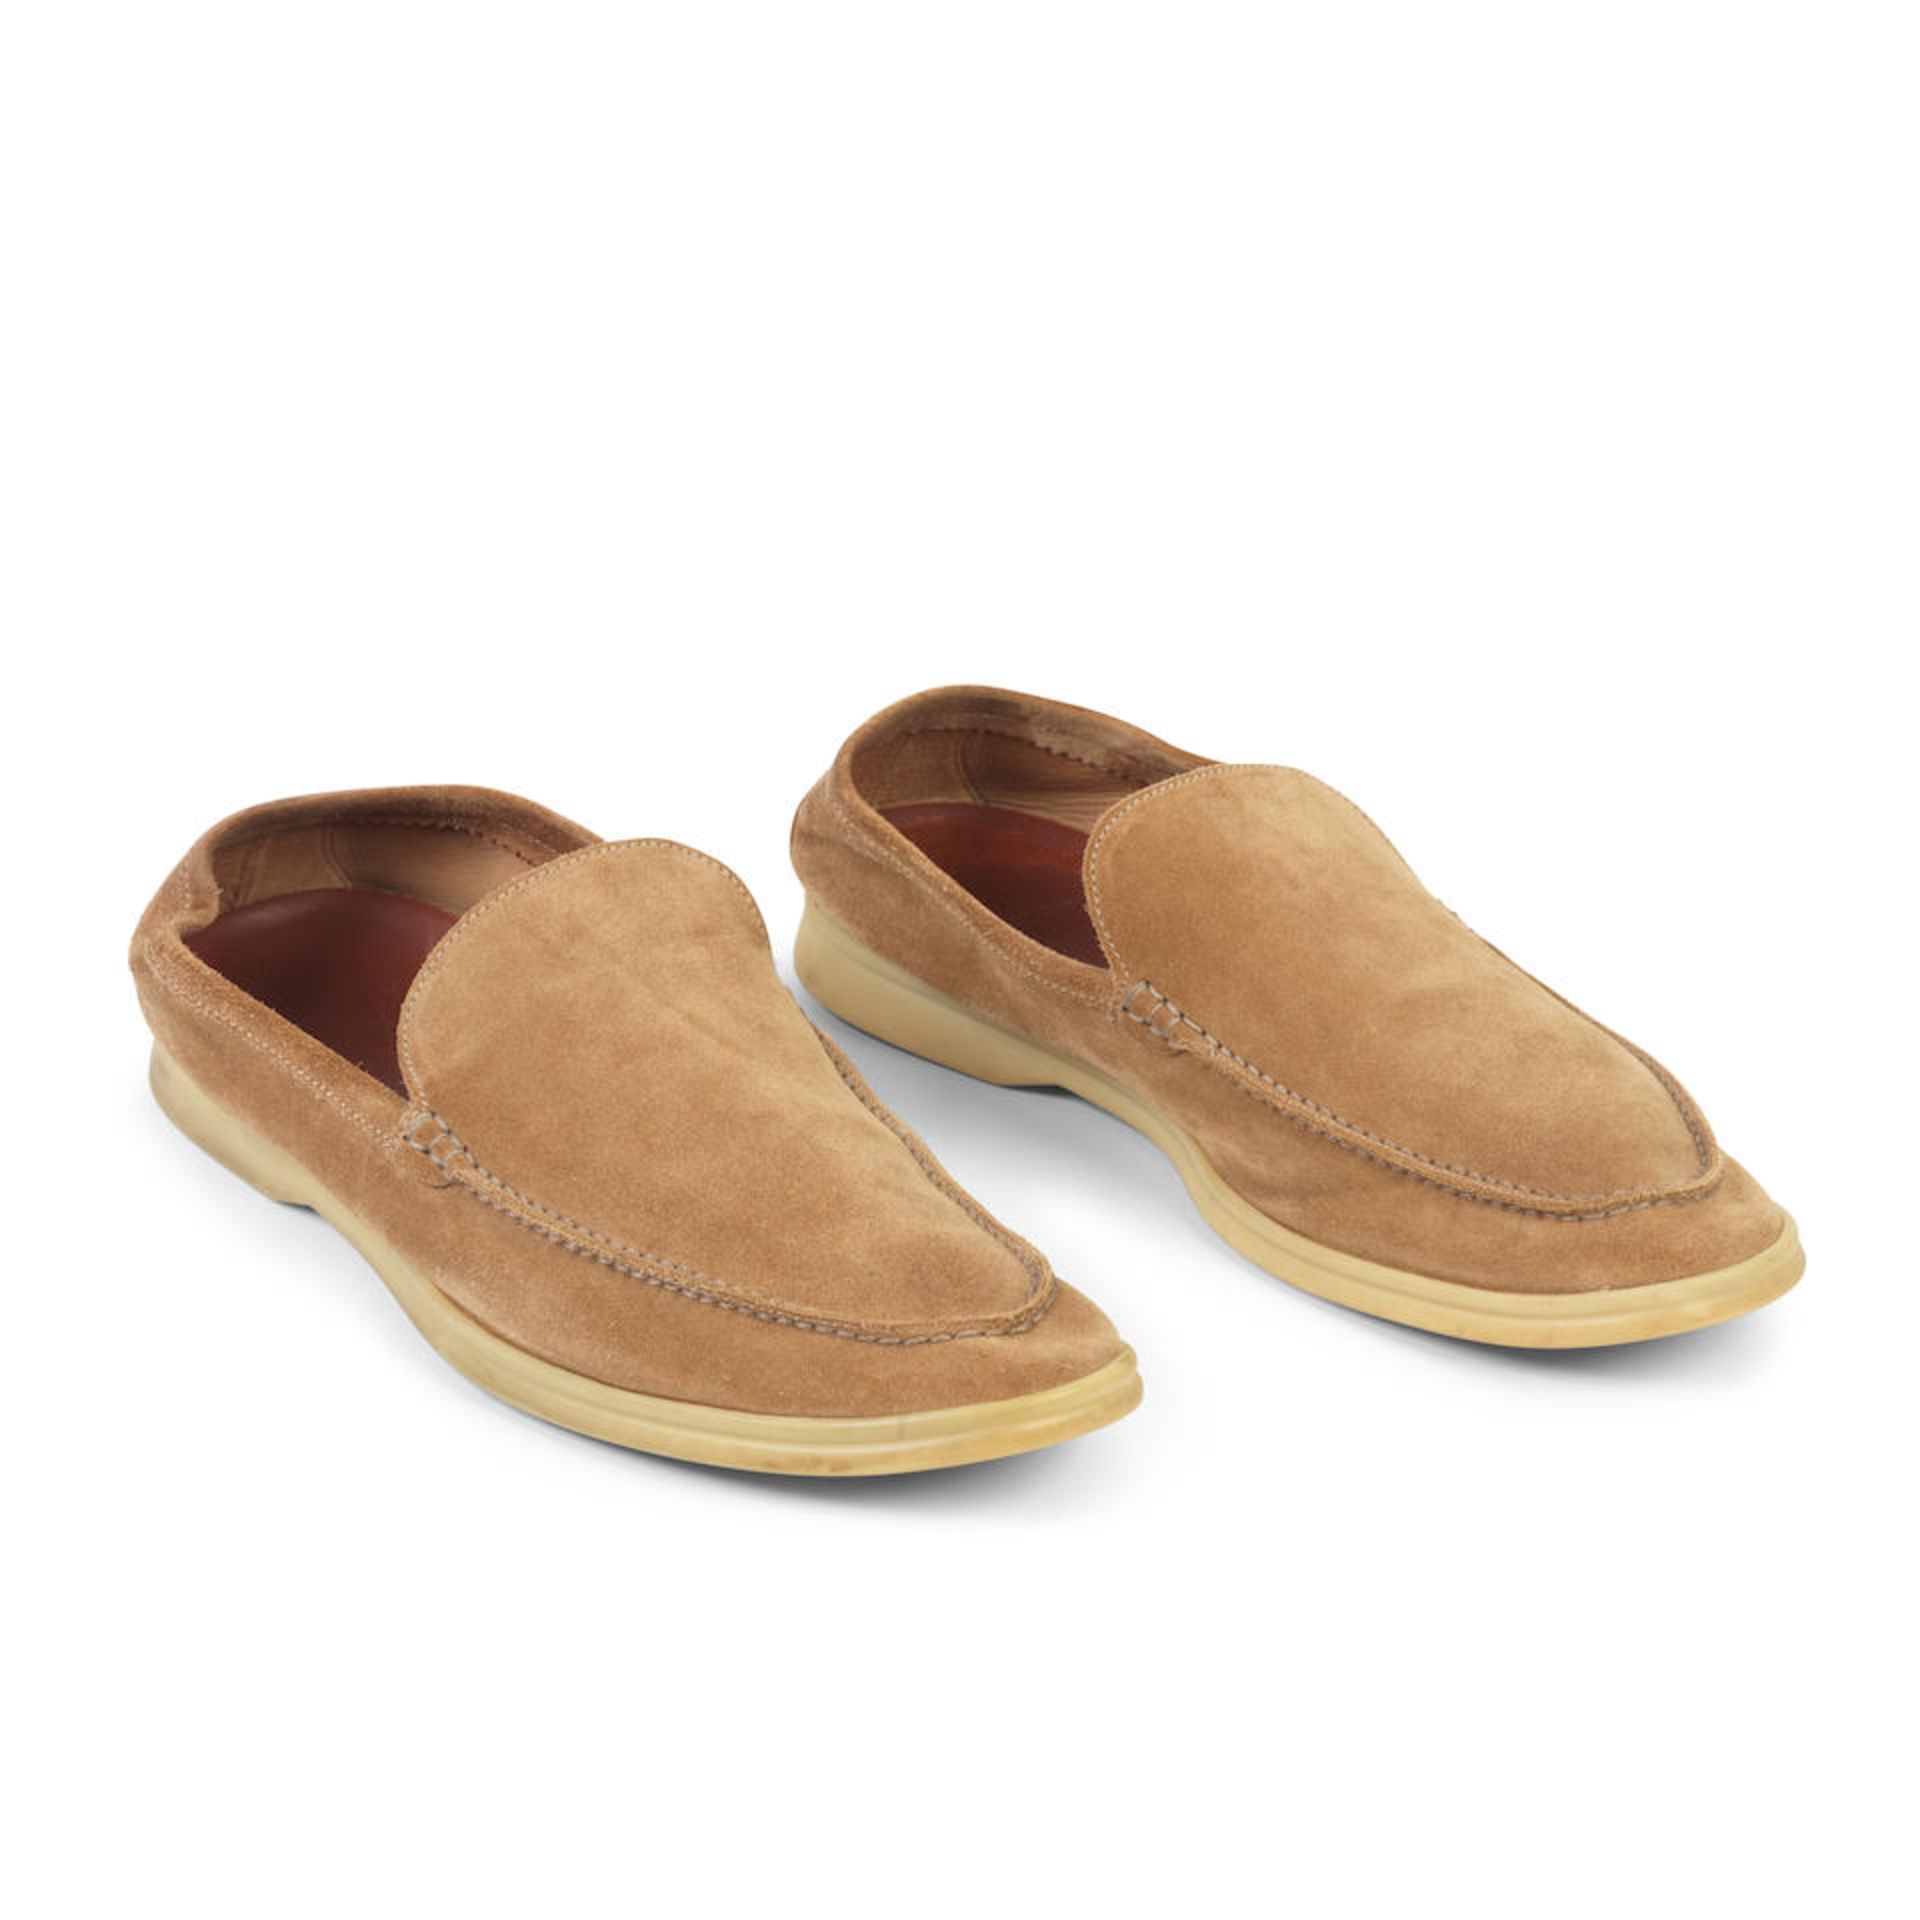 Loro Piana: a Pair of Men's Summer Walk Suede Loafers